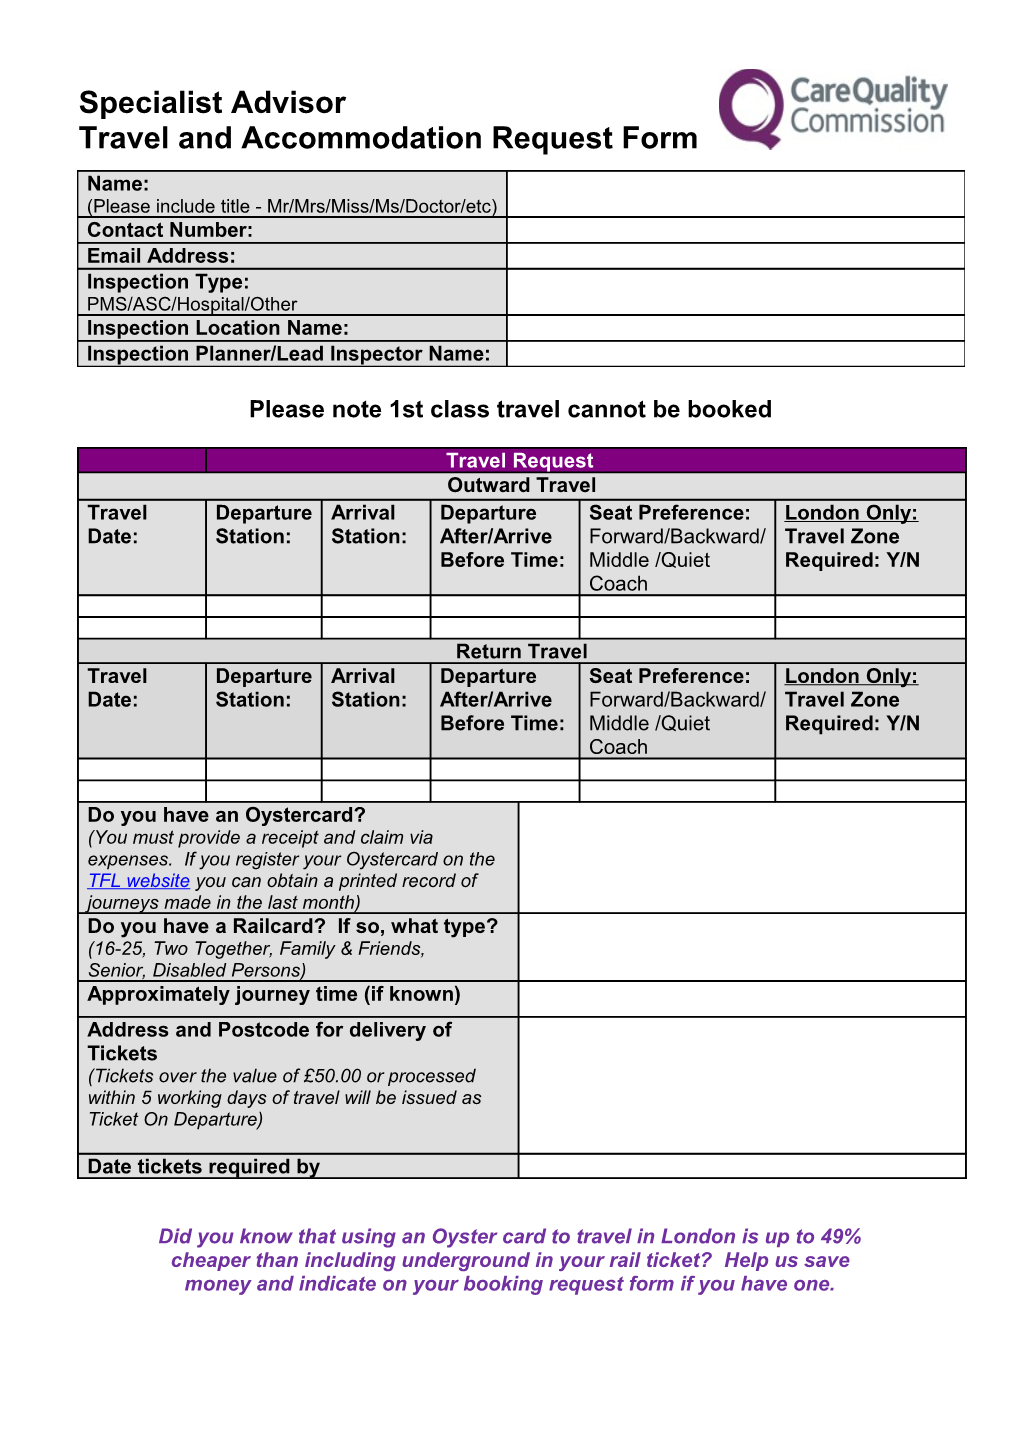 Travel and Accommodation Request Form